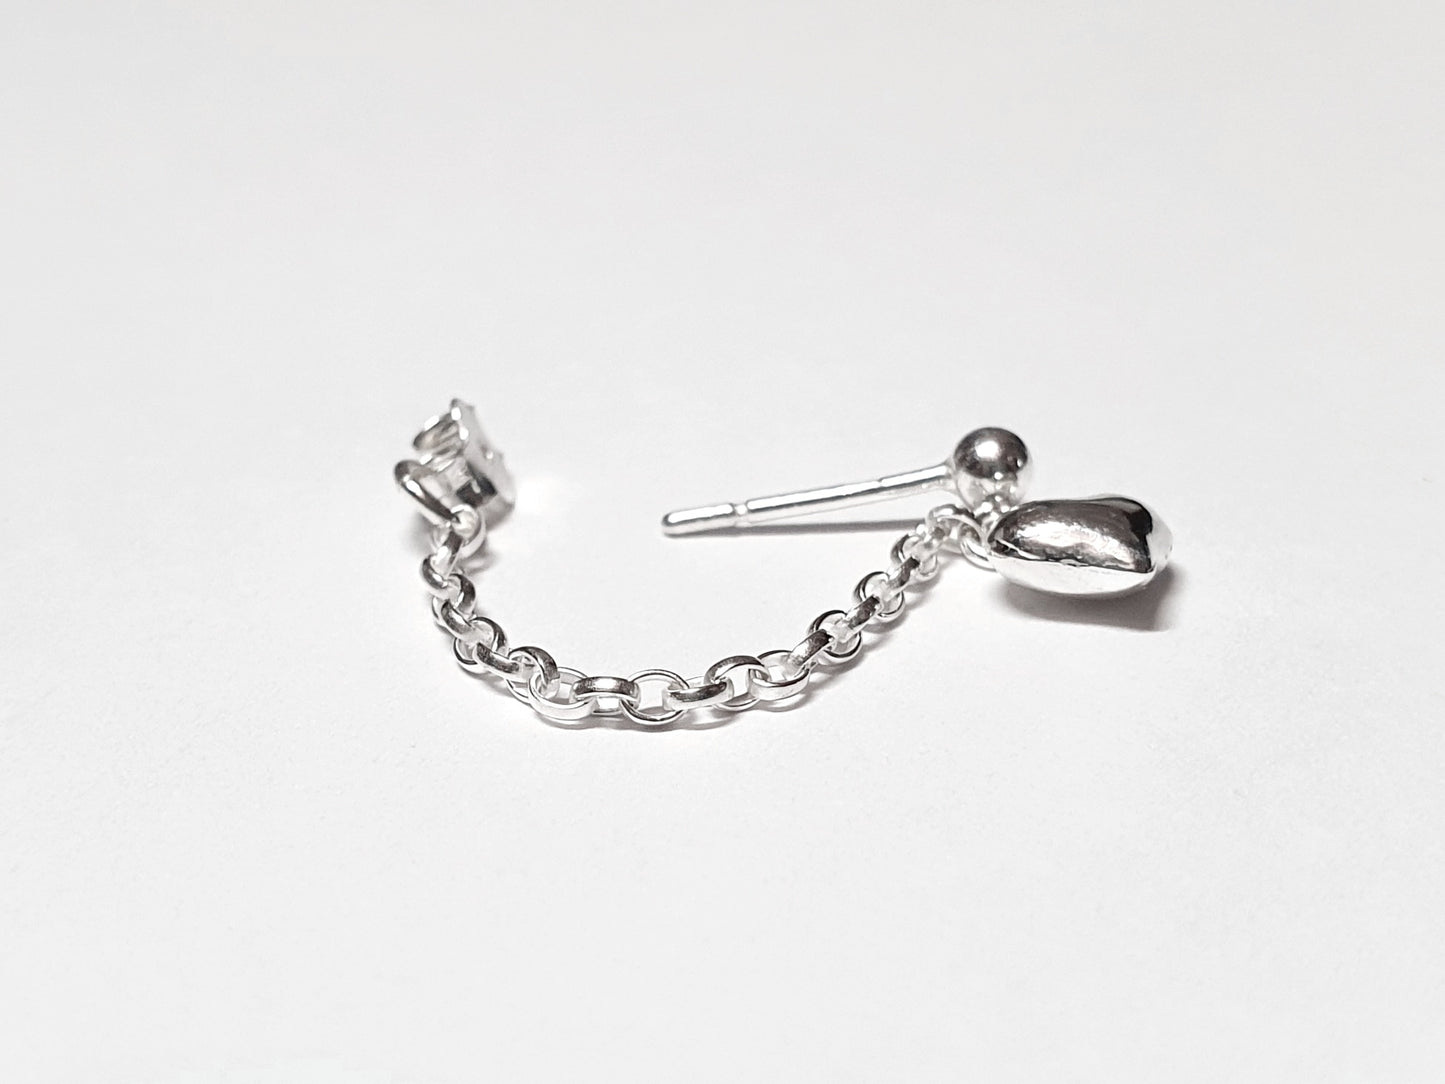 Puffed Heart Helix Cartilage Chain Earring. 925 Sterling Silver